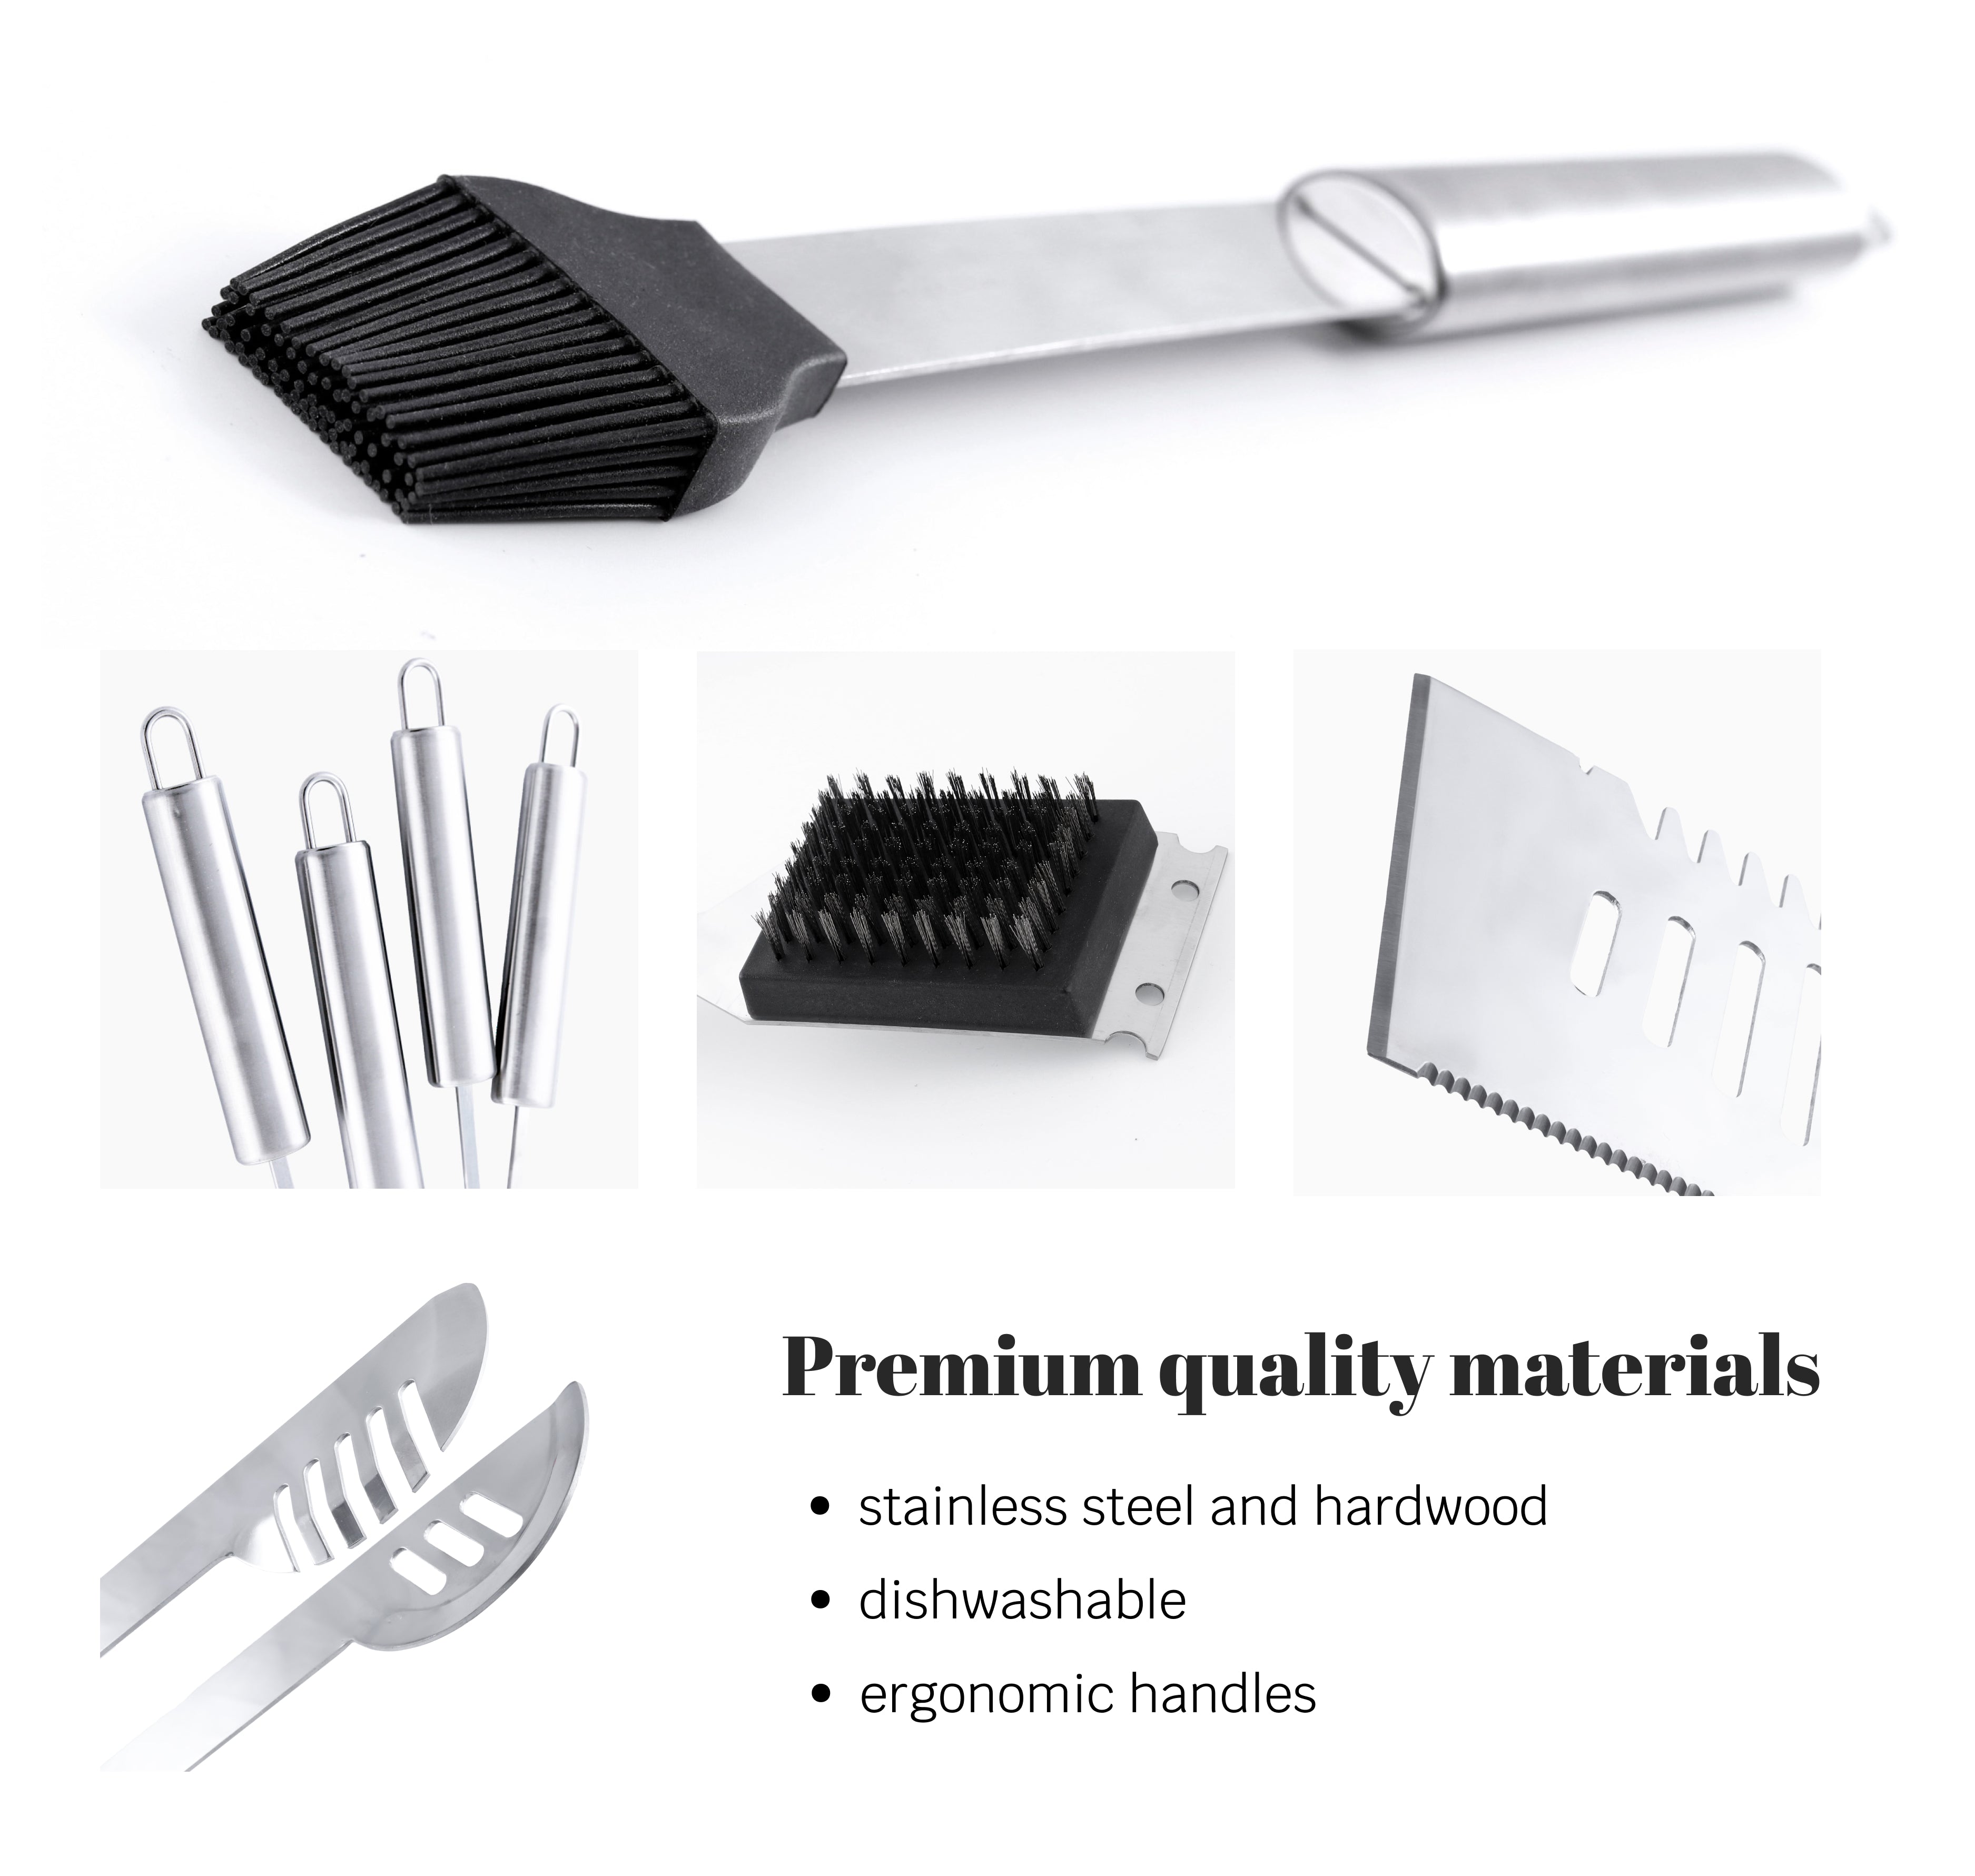 Grill Accessories for Outdoor Grilling - Outdoor Grill Accessories for Barbeque "Denver" - Premium Grill Tool Sets Grilling Utensils Set - Griddle Accessories Kit - BBQ Gear